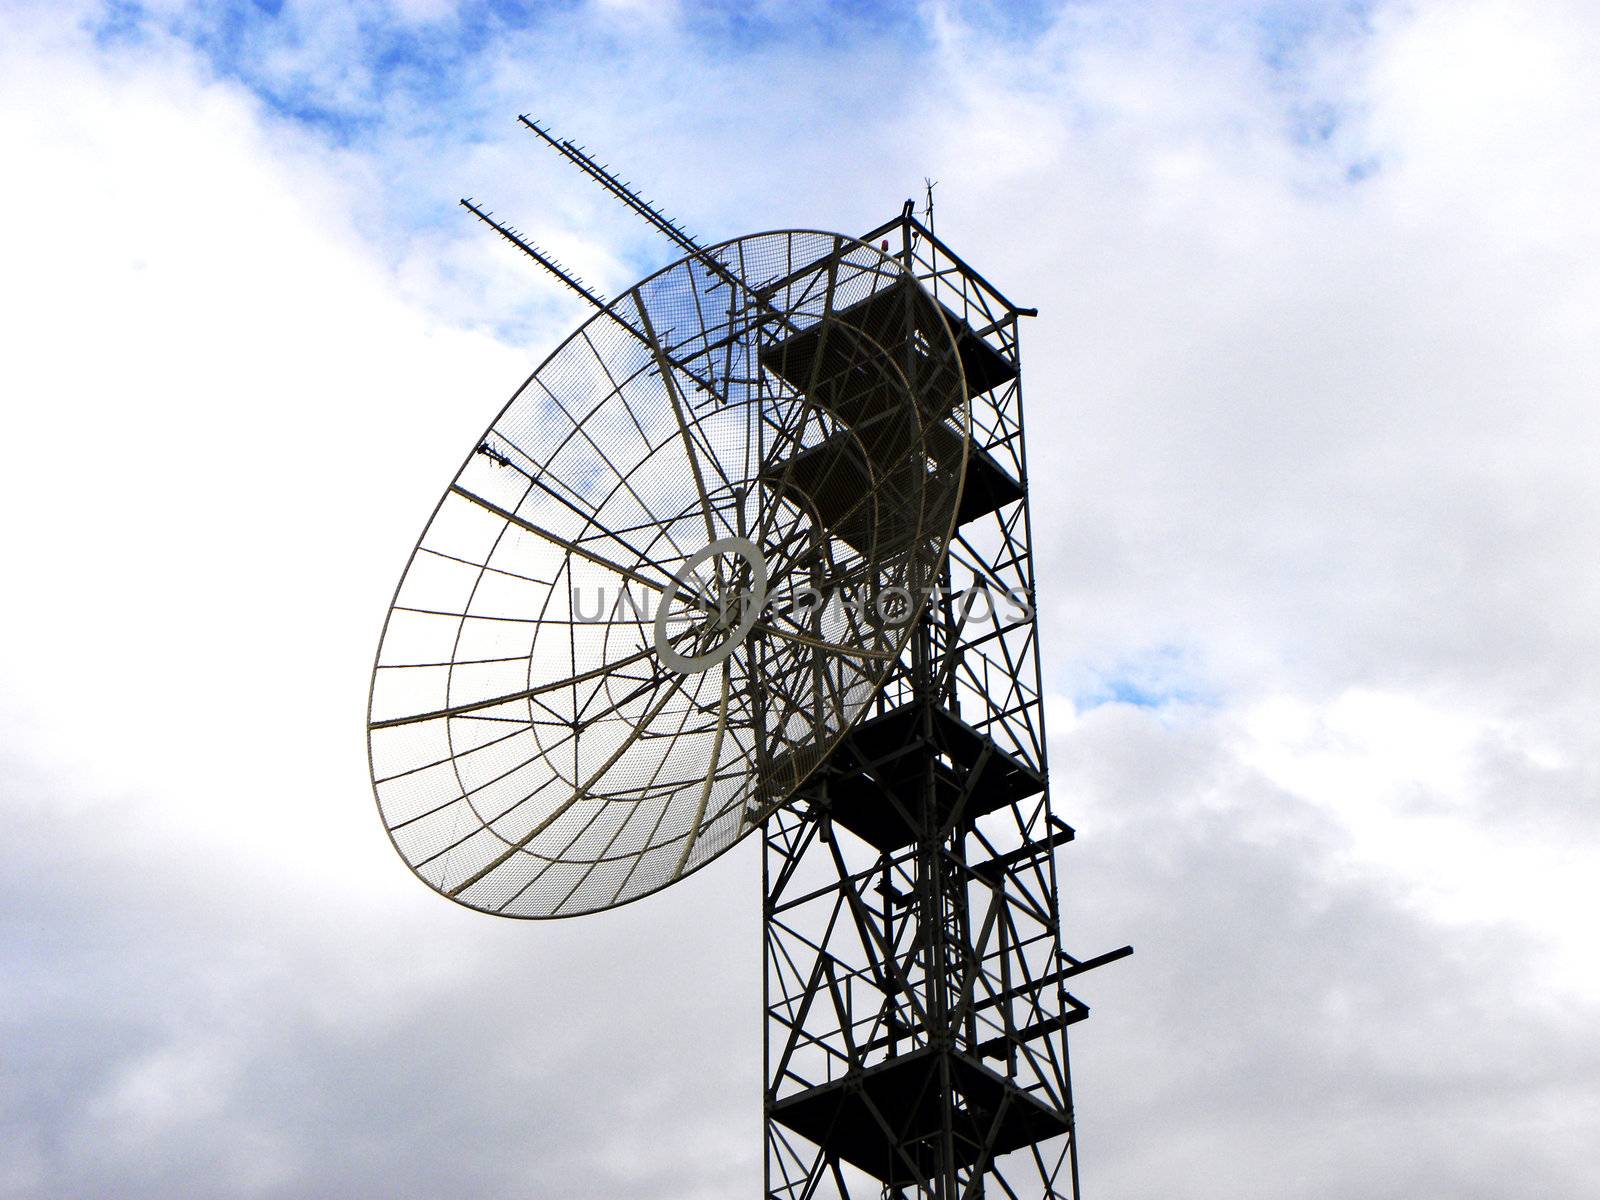 contrast of light in the image of antenna pointing at the sky. Represents the technology and the modern world and the Internet, cable television, cell phones and other